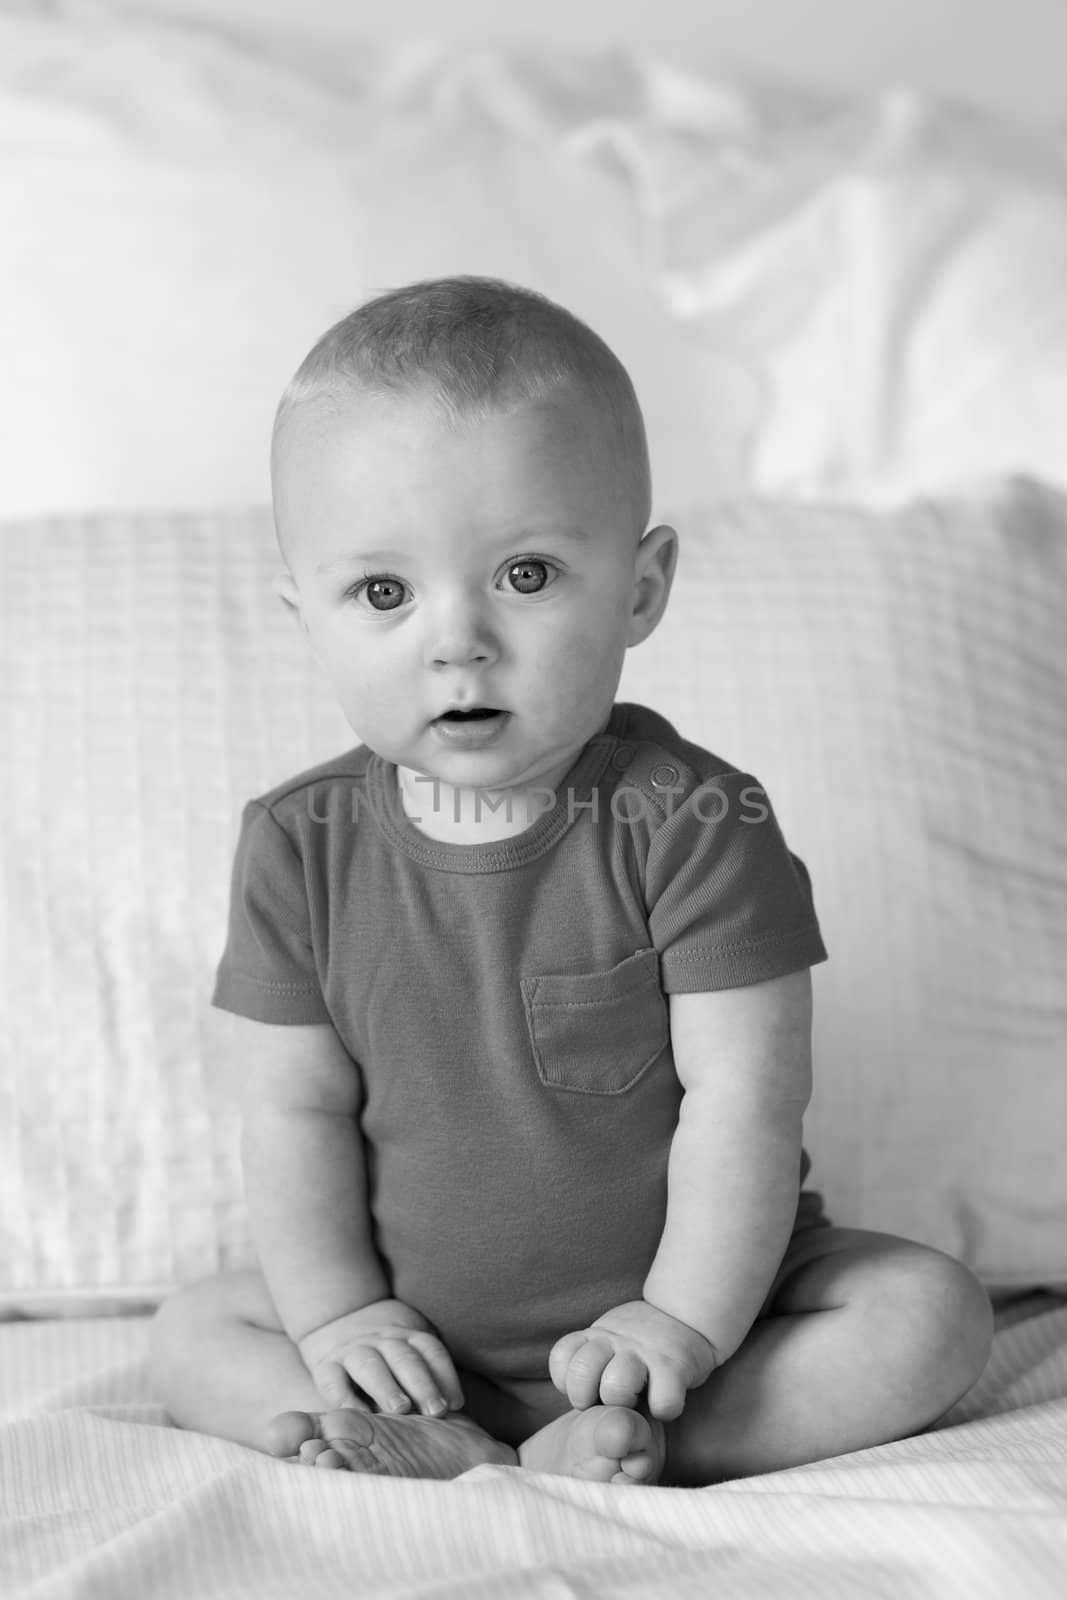 6 month old Boy by ChrisBoswell